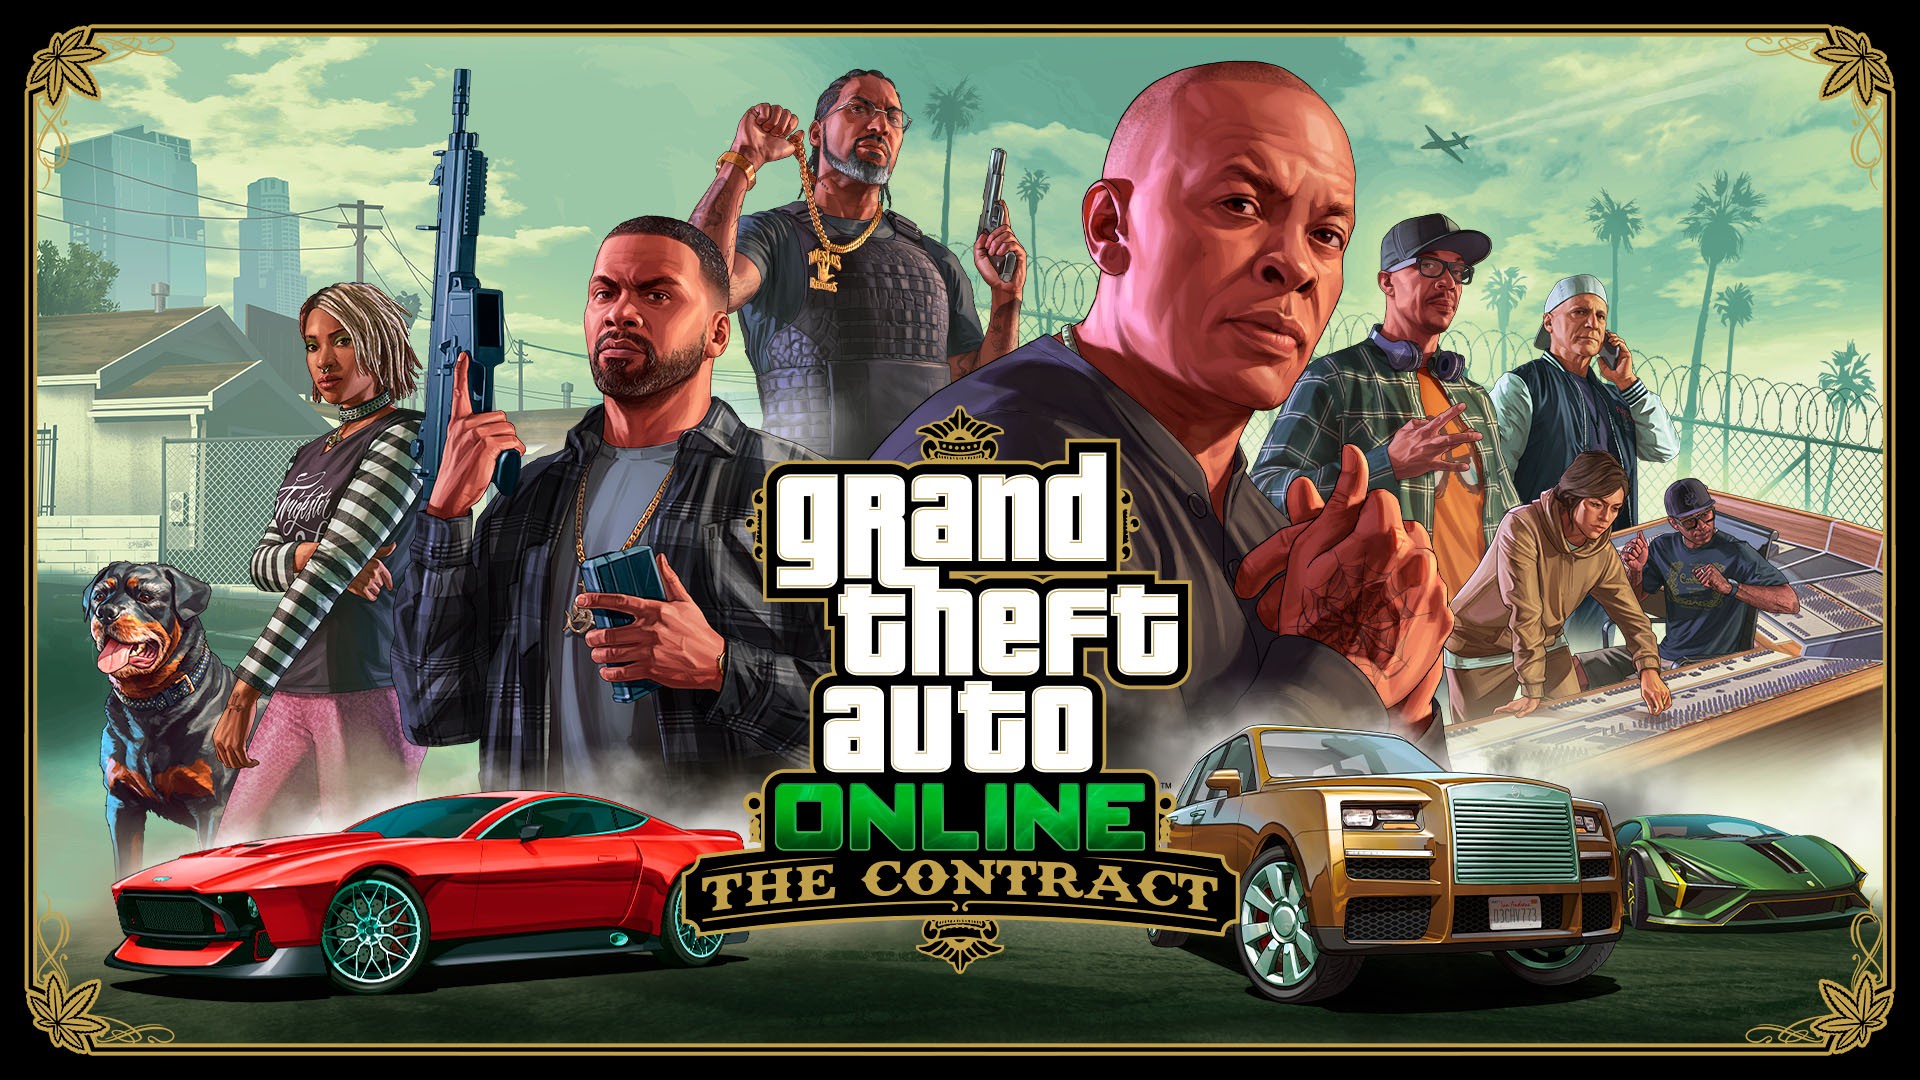 Video For Introducing The Contract, a New GTA Online Story Featuring Franklin Clinton and Friends